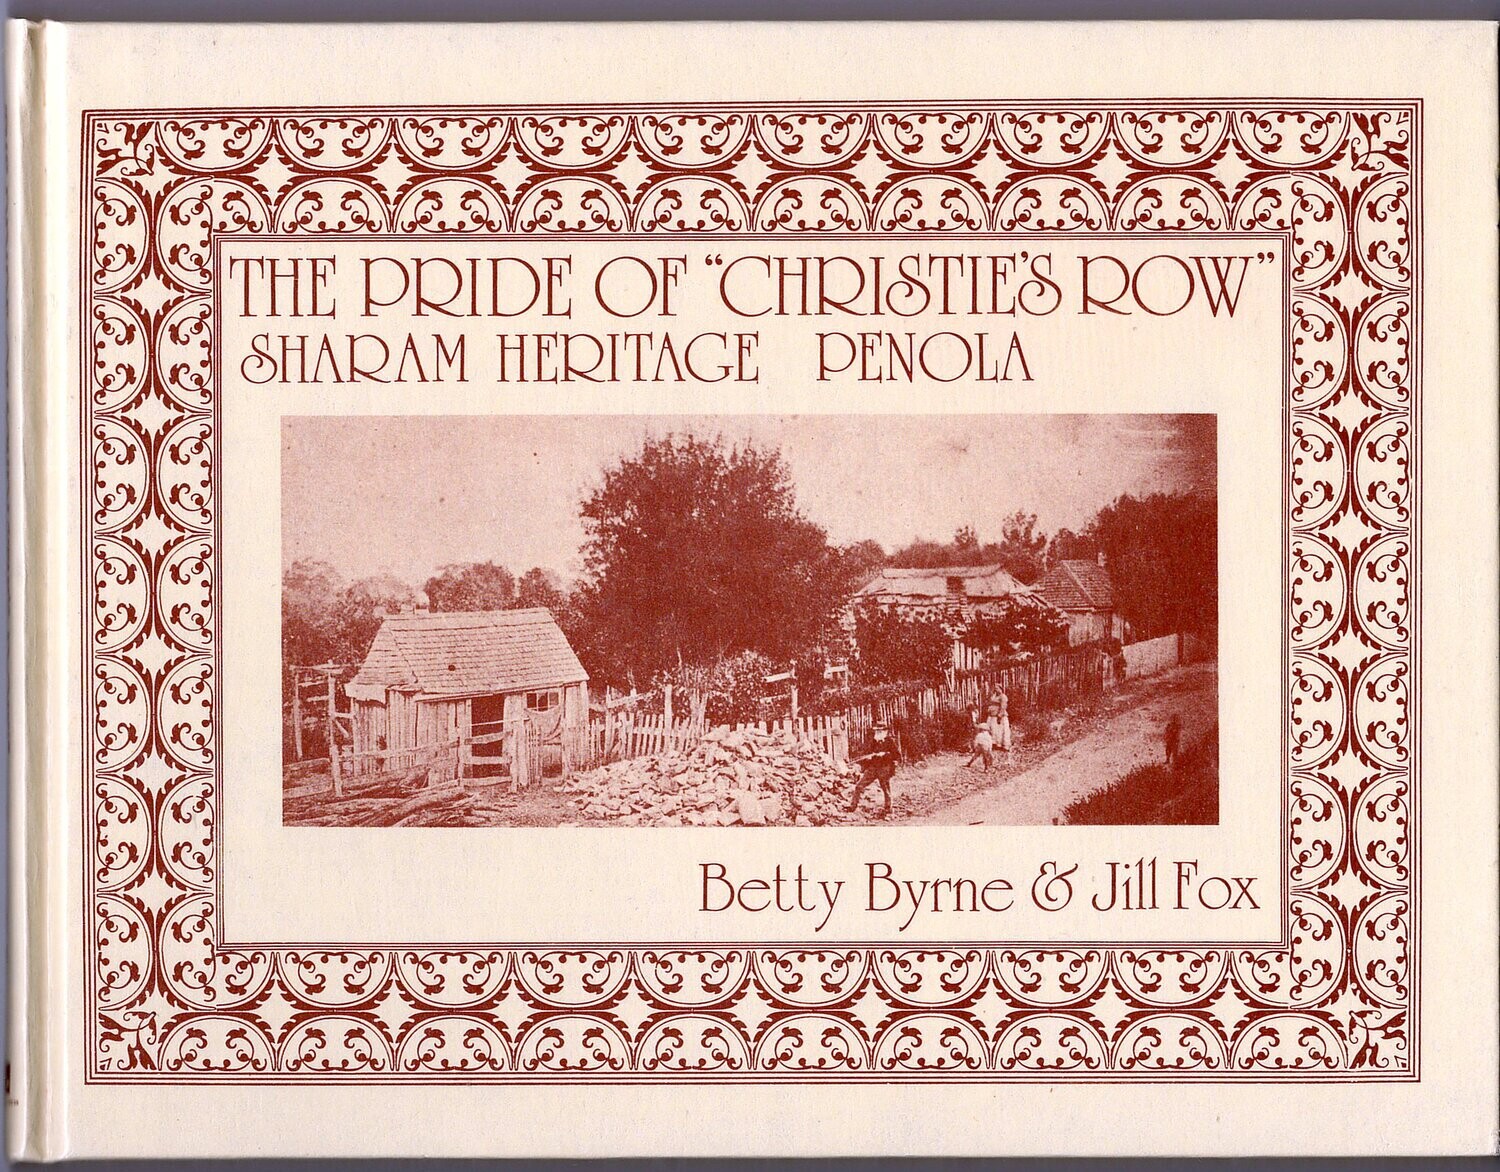 The Pride of Christie's Row: Sharam Heritage, Penola by Betty Byrne and Jill Fox